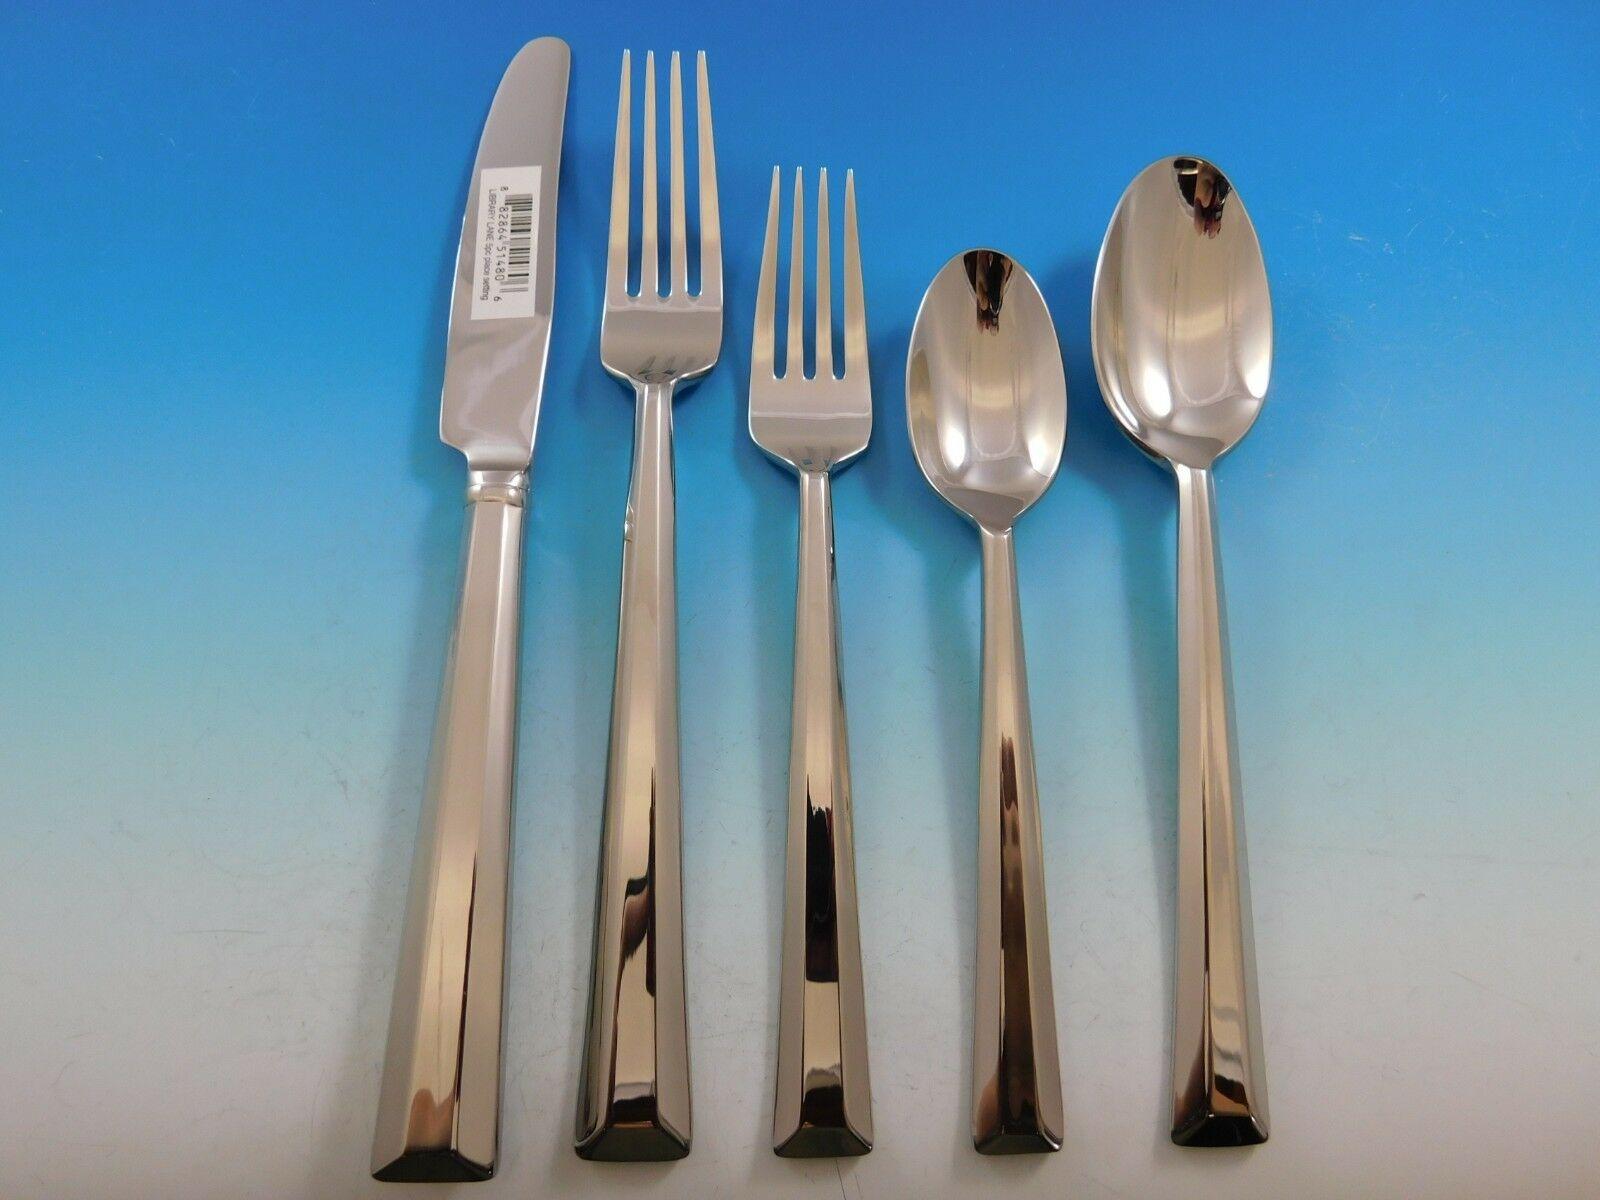 With its simple, yet classic, ribbed design, the Kate spade New York Library Lane flatware set is perfectly suited for formal dinnerware, but also works very well in more casual settings, adding just the right amount of style to make your dining